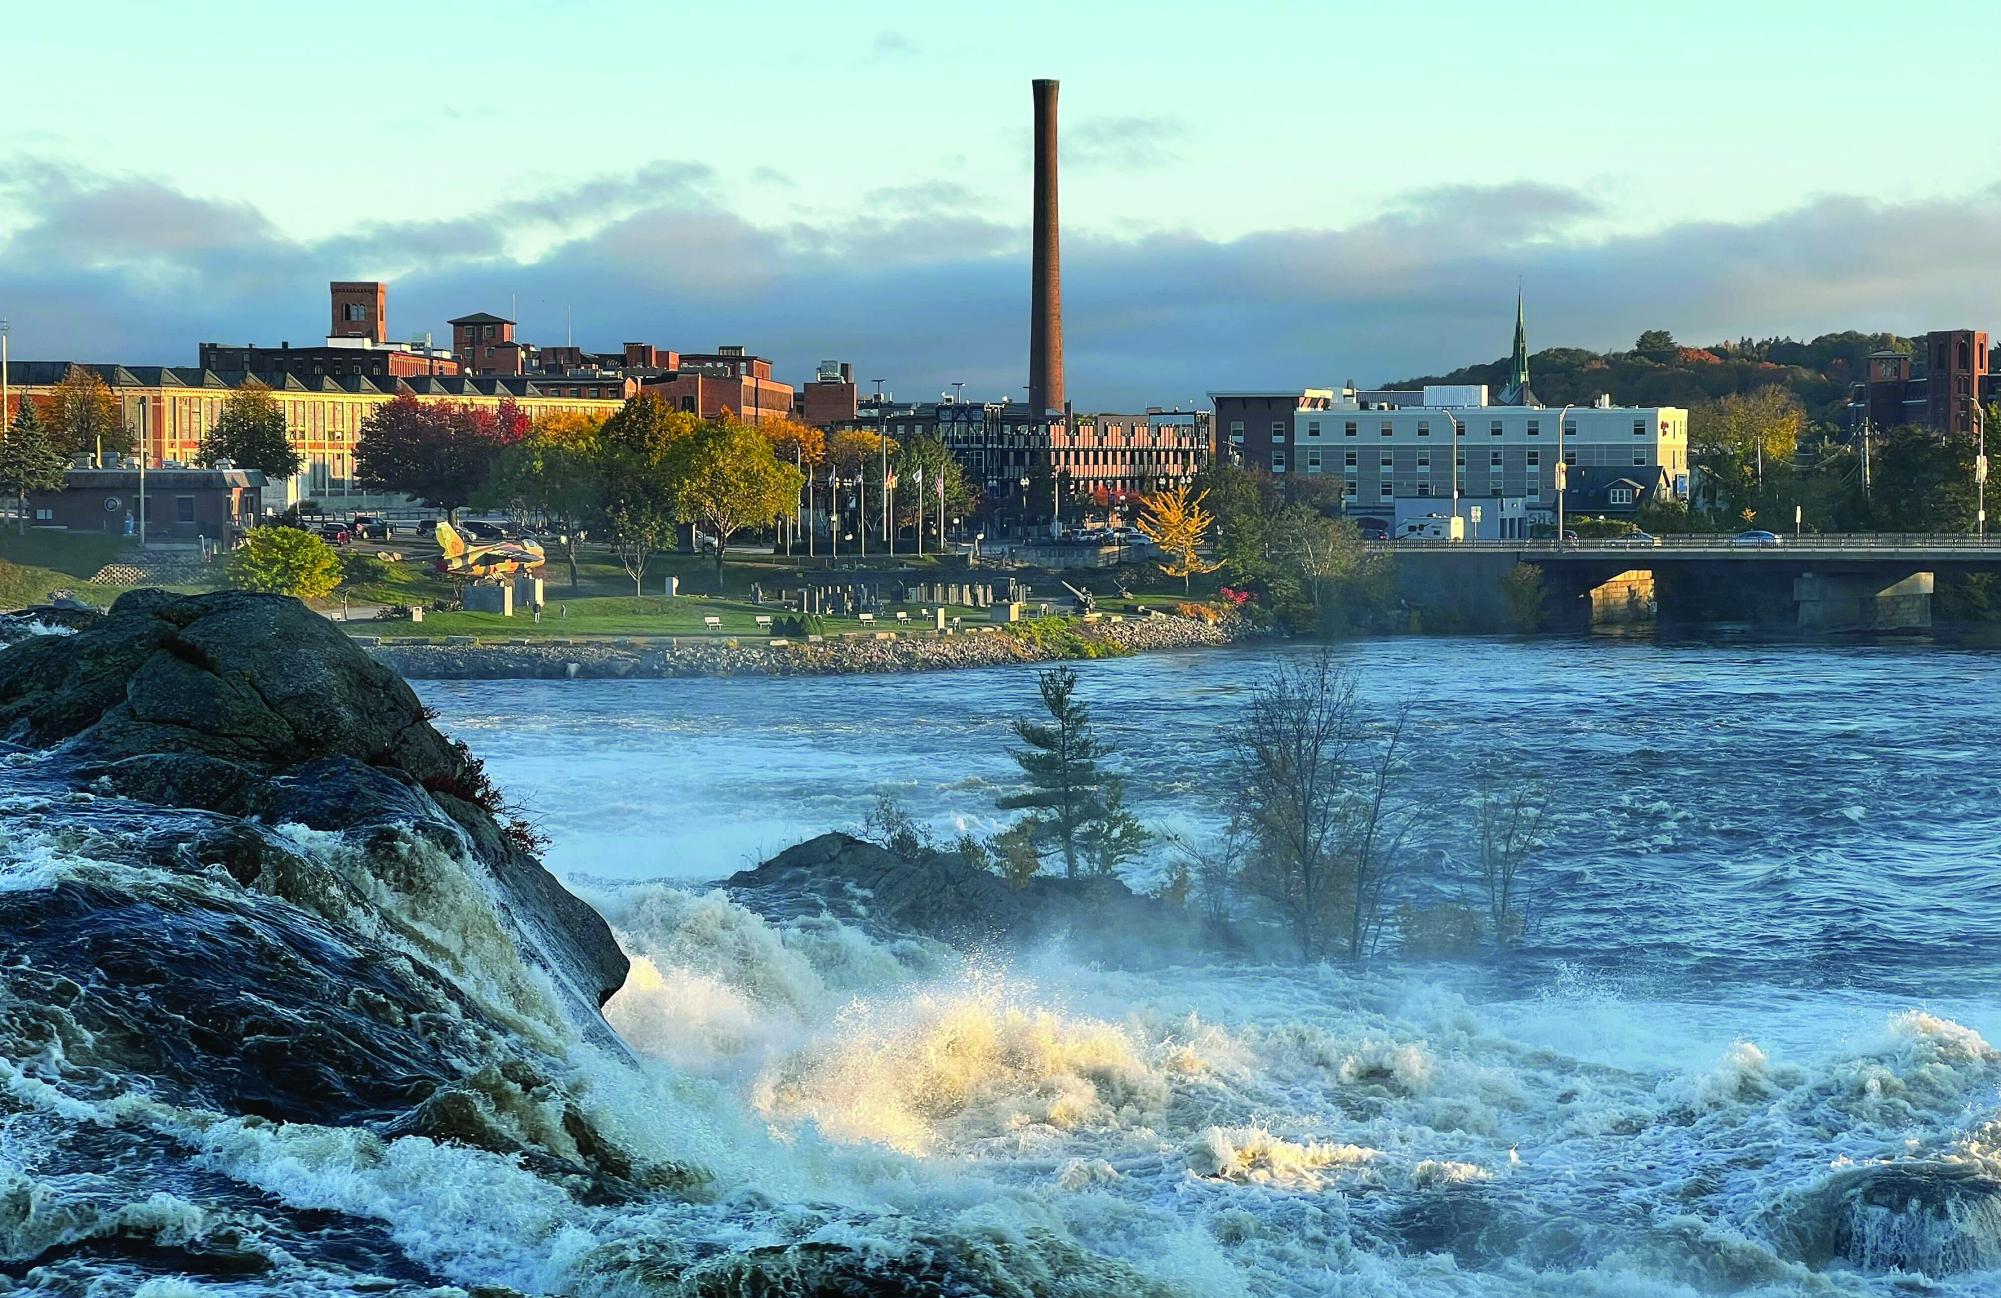 View from the Androscoggin Riverwalk, a lovely destination walking distance from campus.